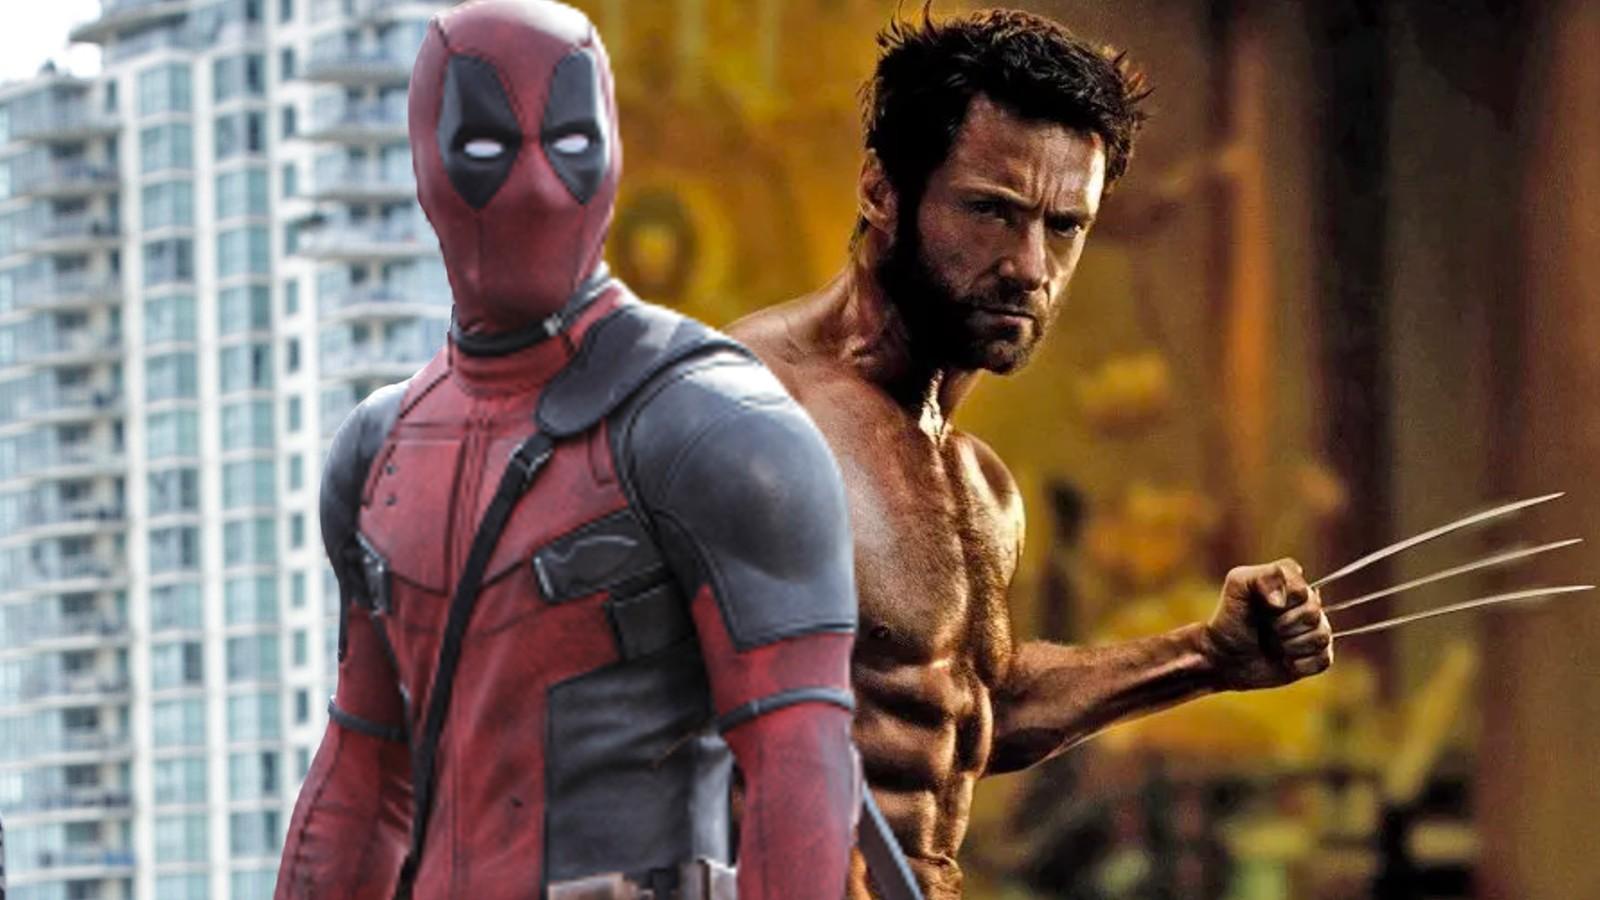 Deadpool and Wolverine, who'll both appear in Deadpool 3